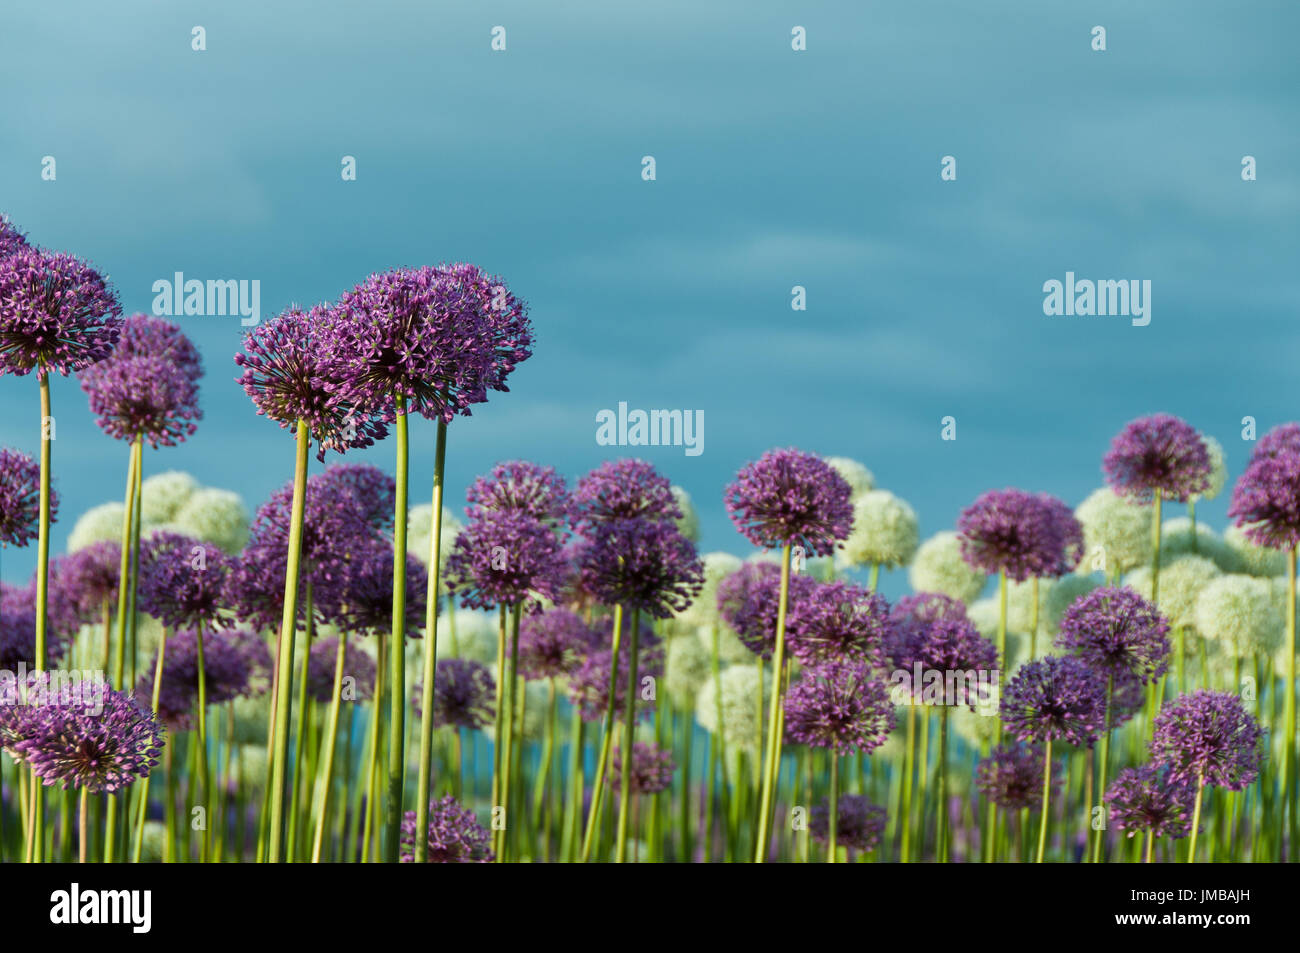 Whimsical Field of Purple and White Allium Flowers in a Field Stock Photo